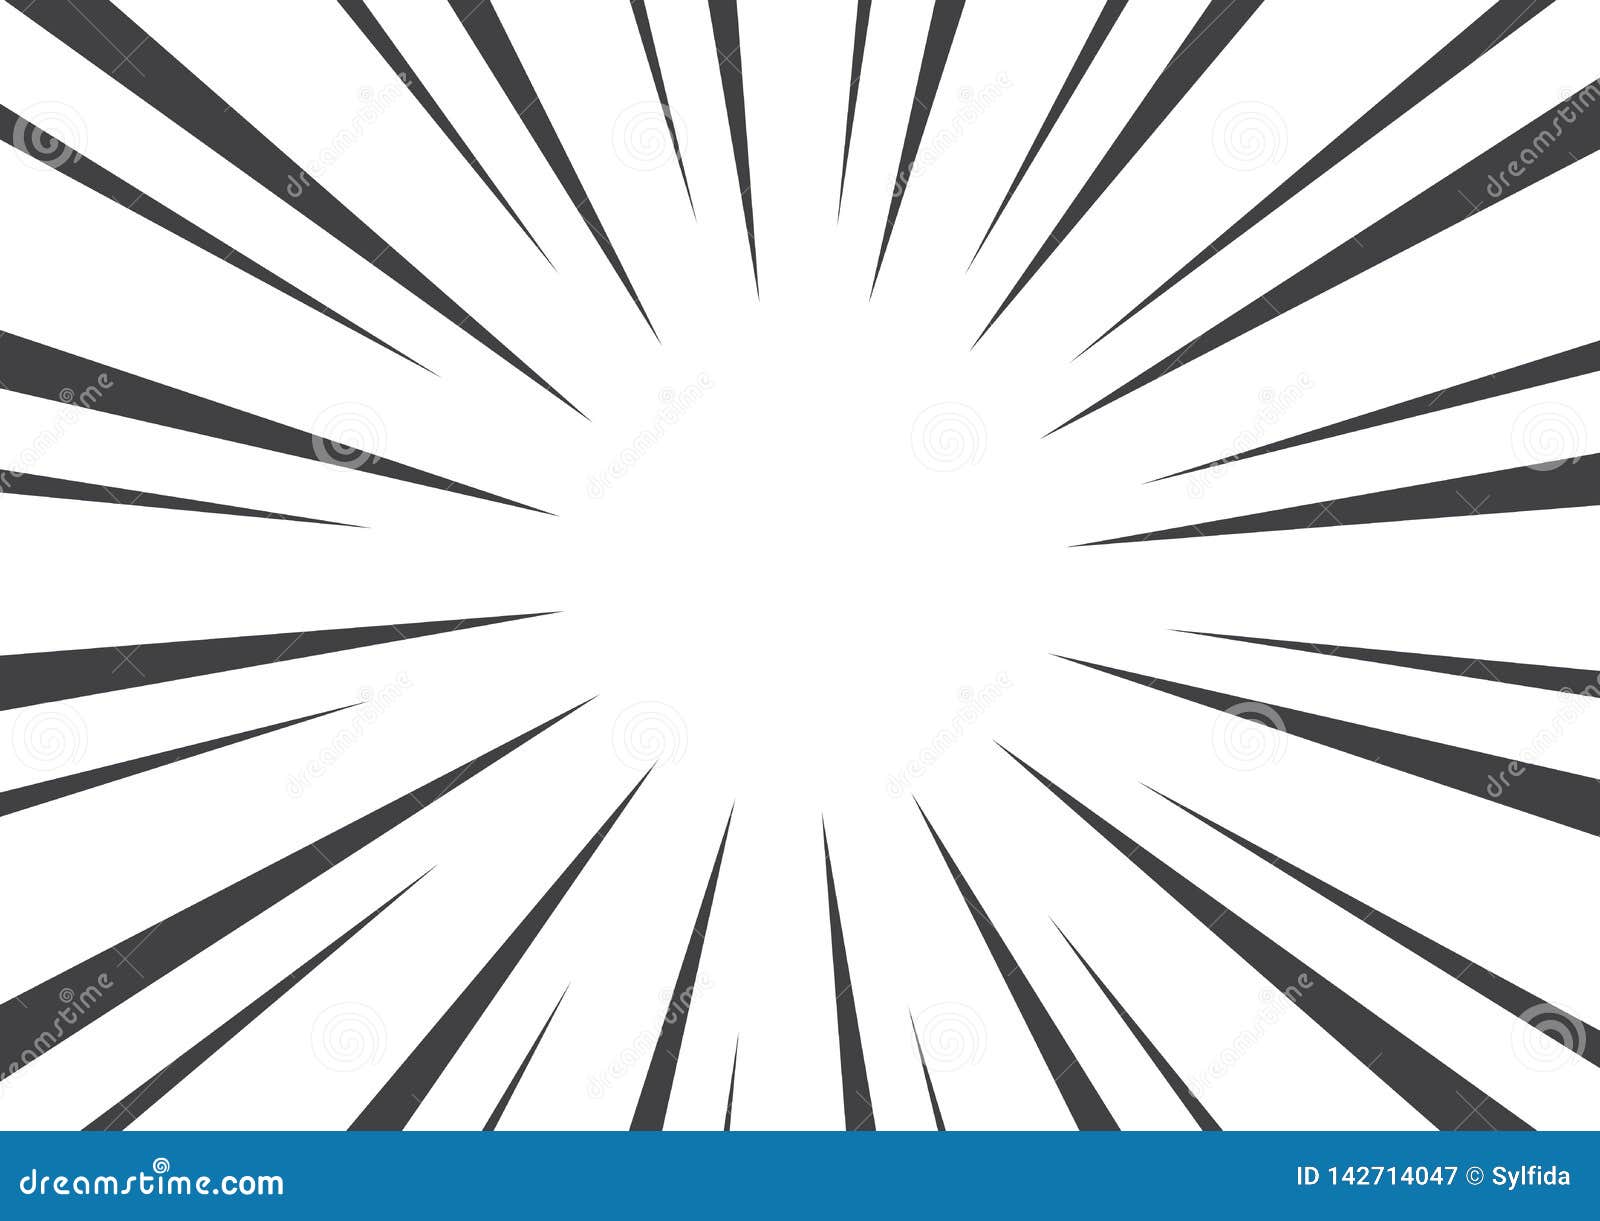 Black And White Pop Art Background With Sunbeams. Vector